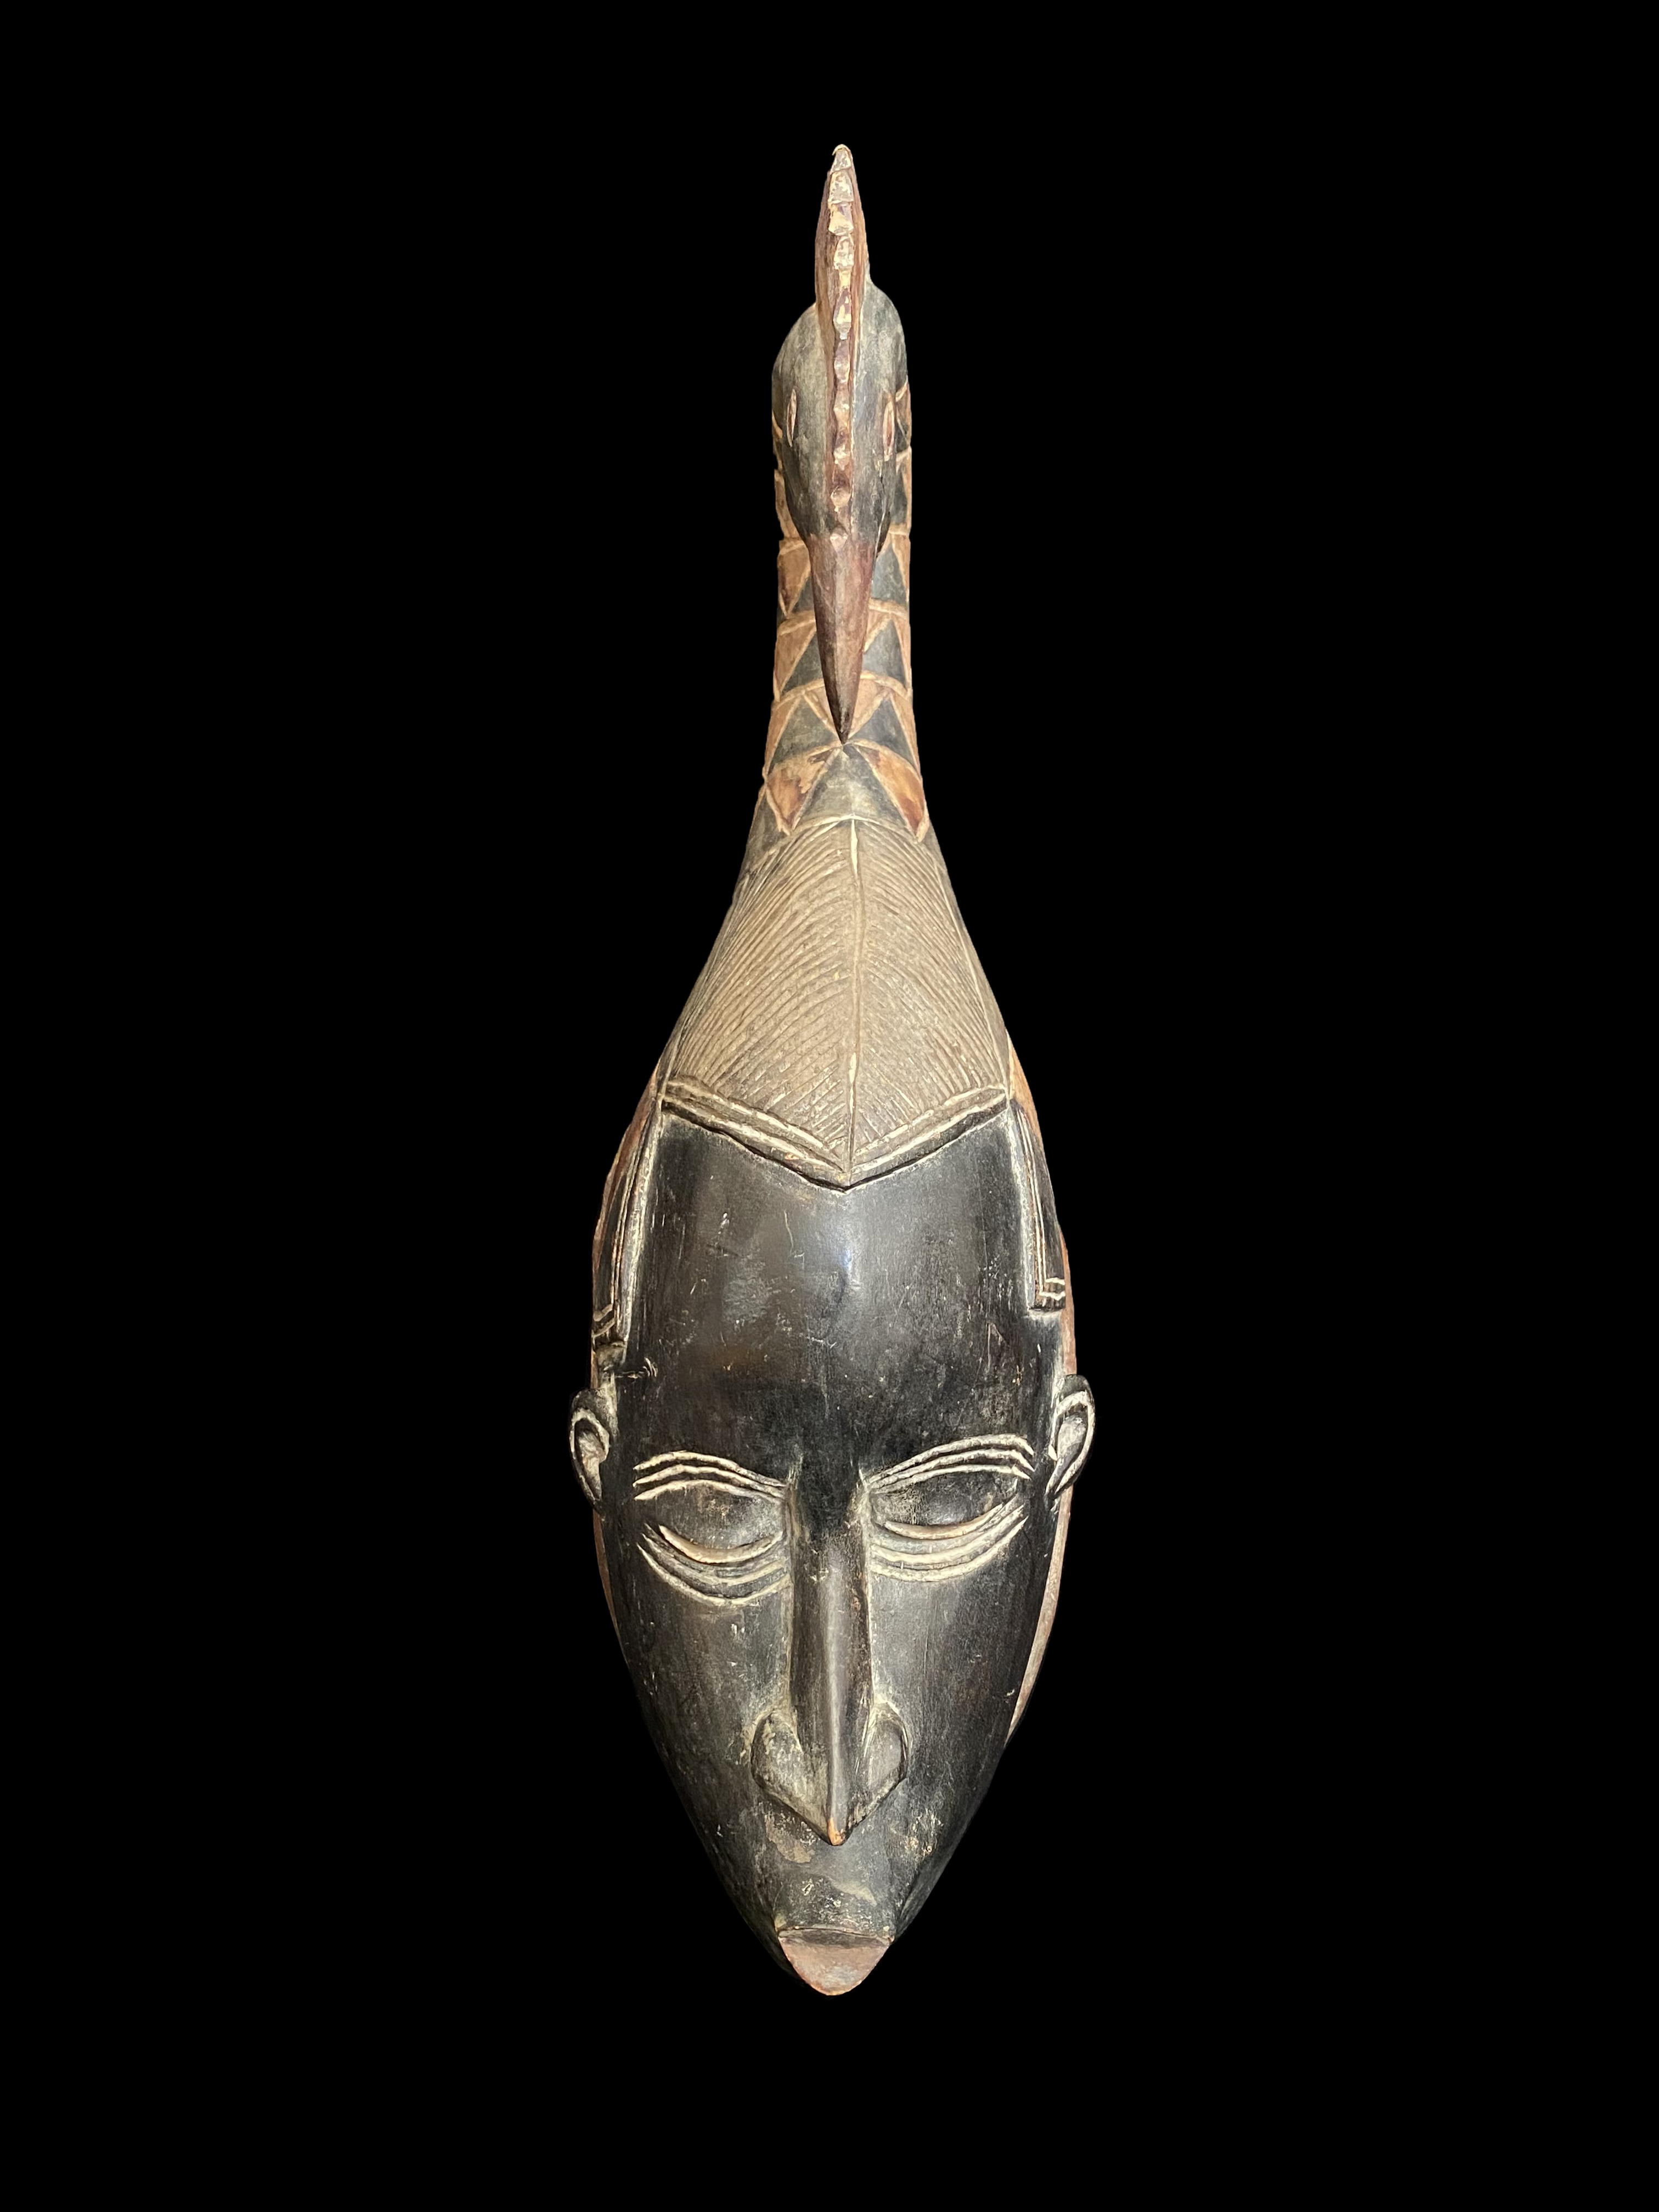 Mask with Rooster Superstructure - Guro People, Ivory Coast